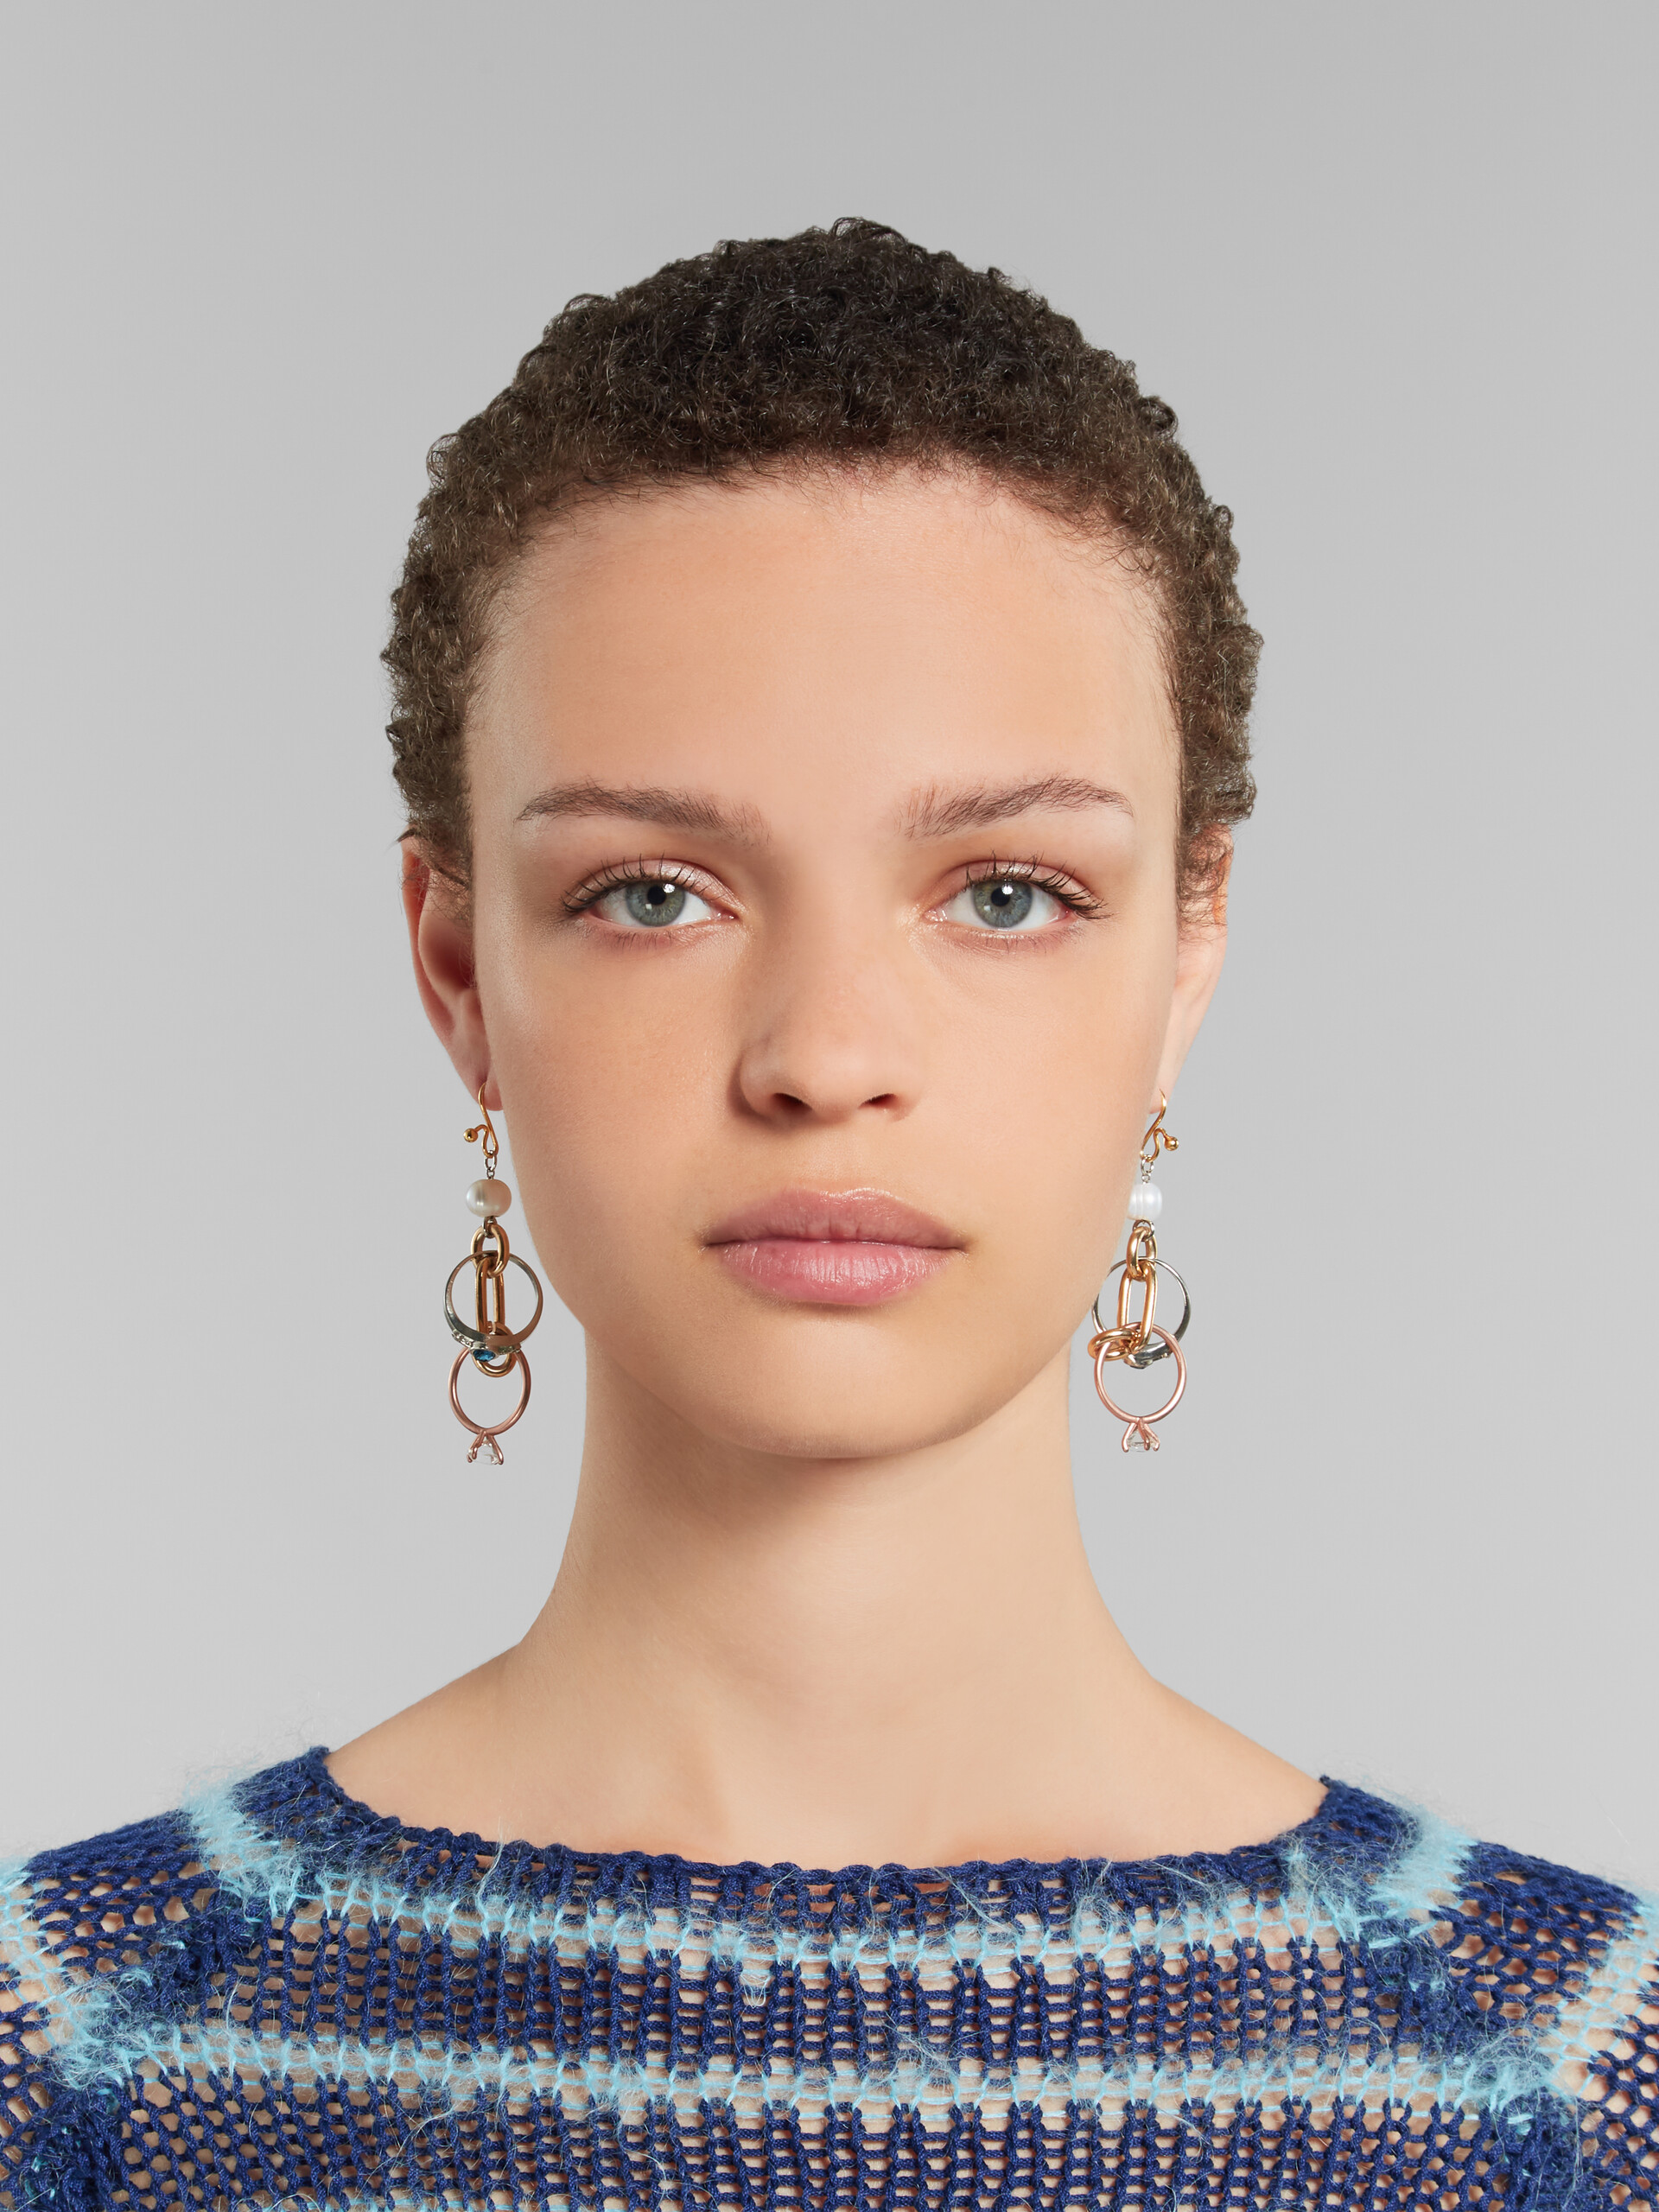 Drop earrings with chains and rings - Earrings - Image 2